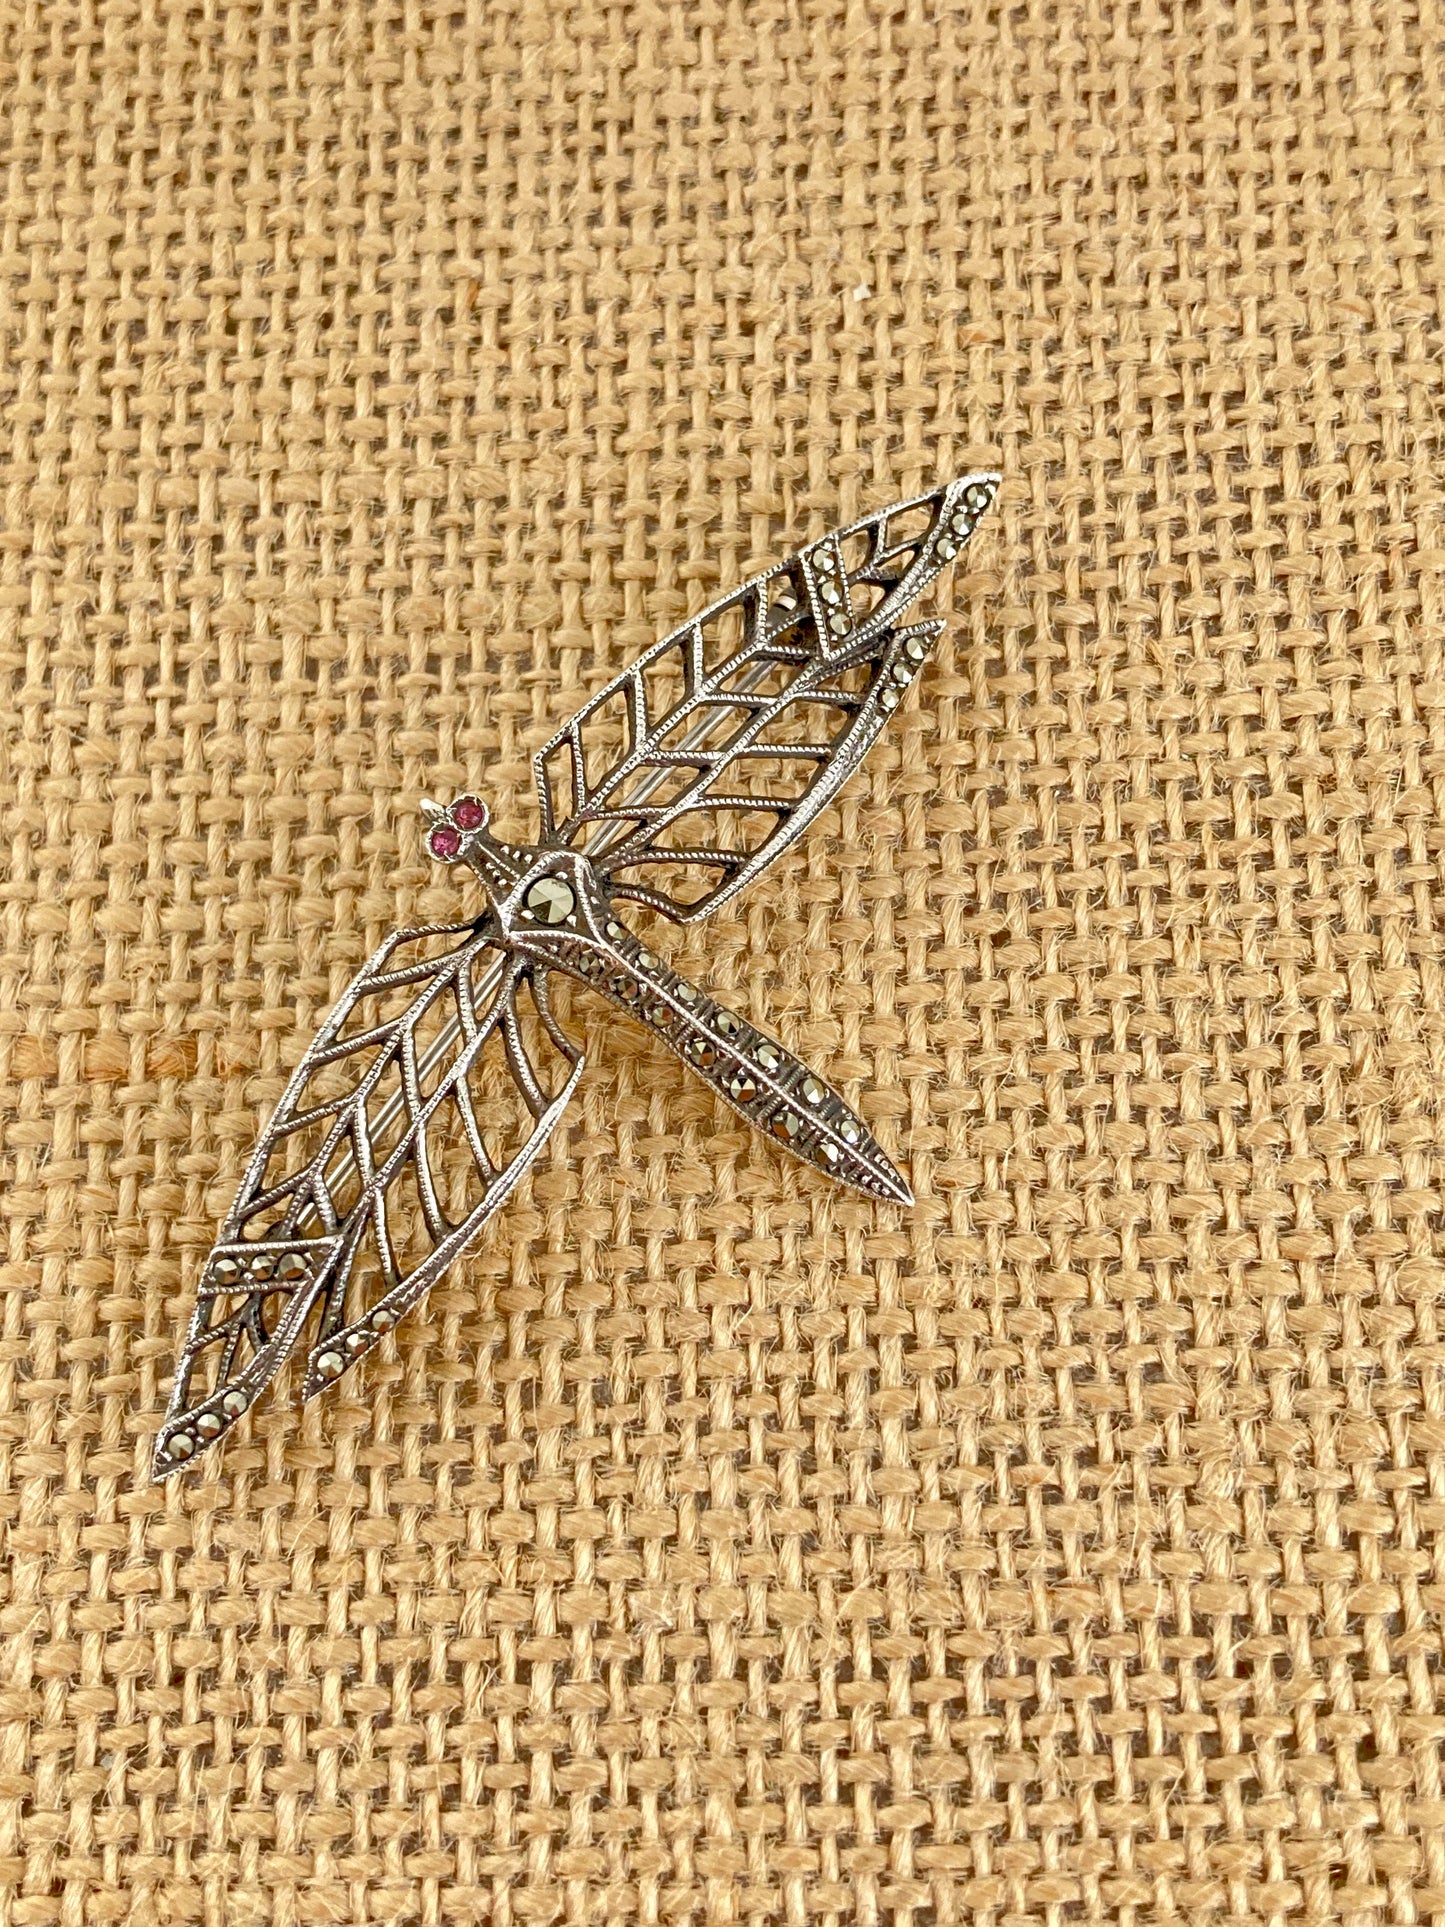 Sterling Silver Dragonfly Brooch w/Marcasite and Ruby Eyes